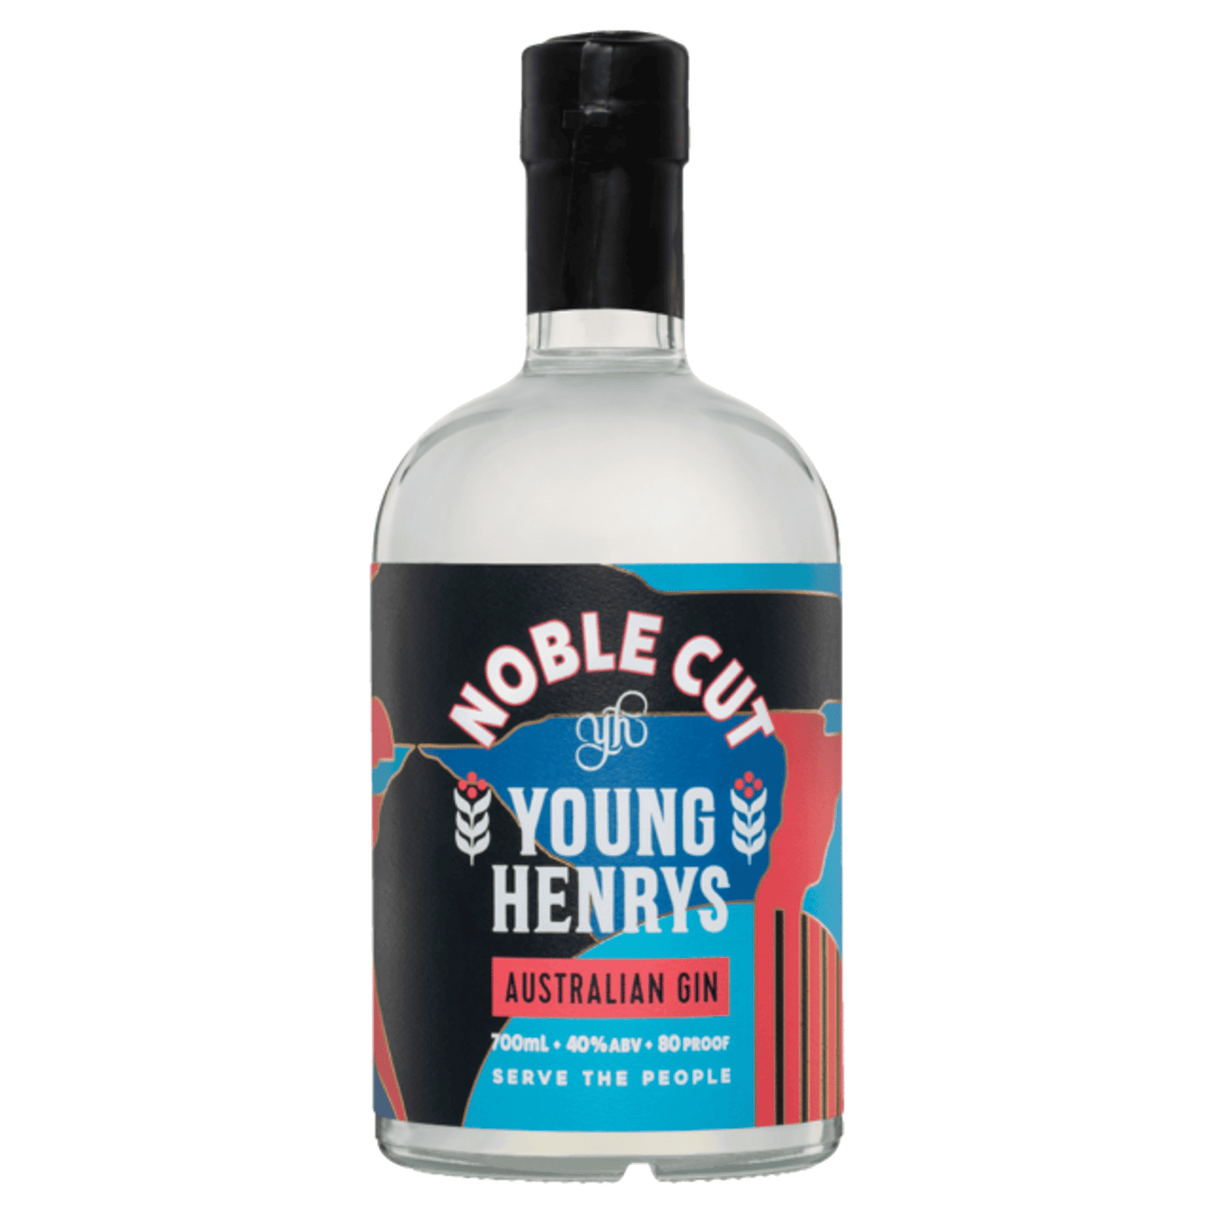 Young Henrys Noble Cut Gin 700ml